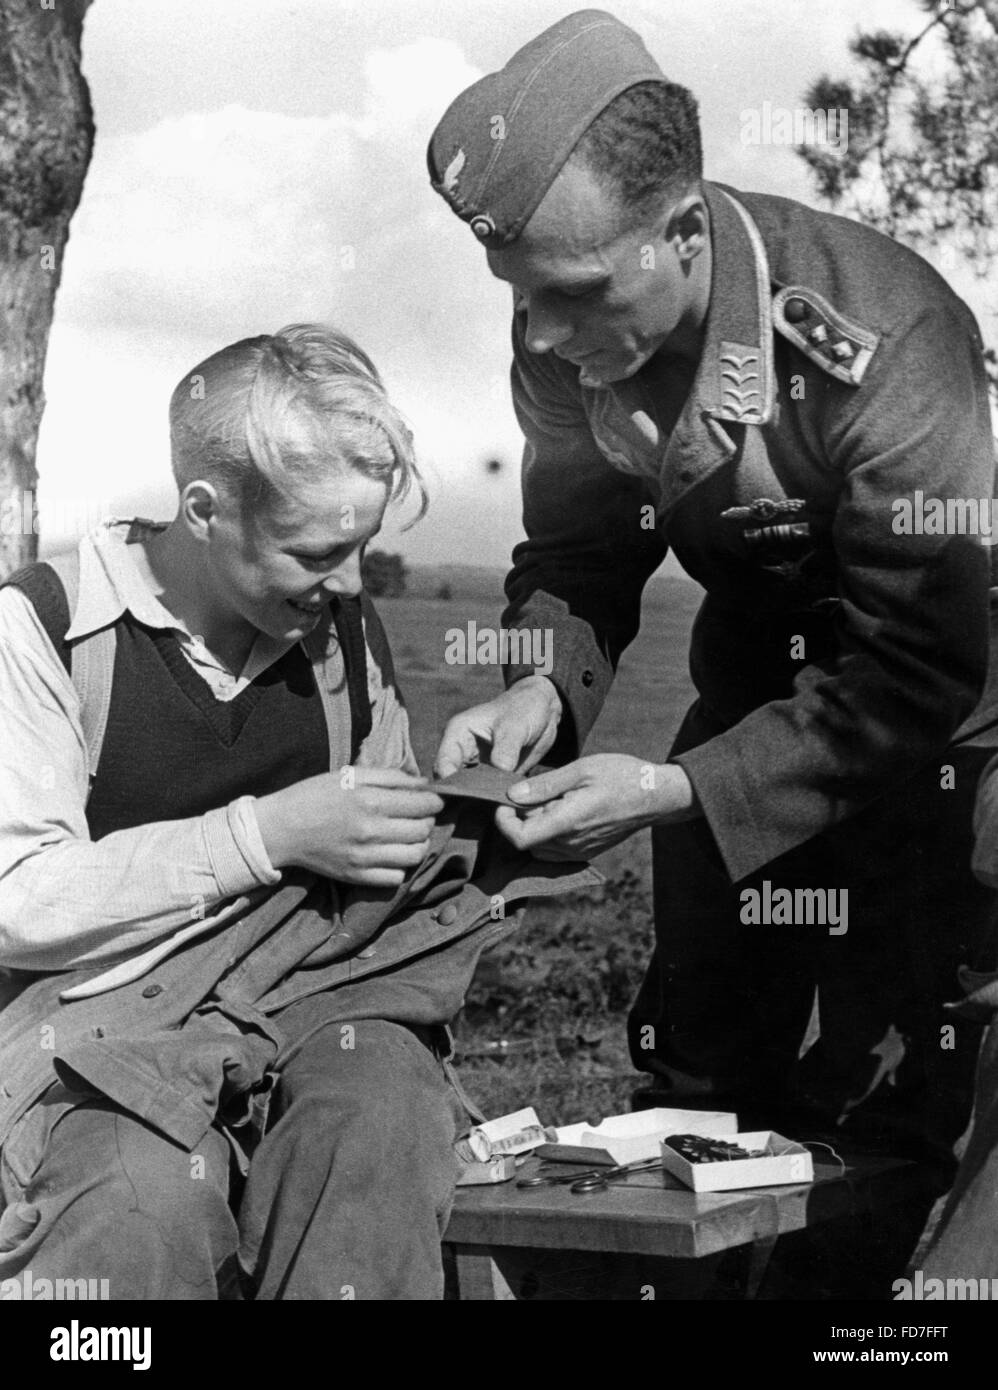 HJ member of a military training camp in Ziegenort, 1943 Stock Photo